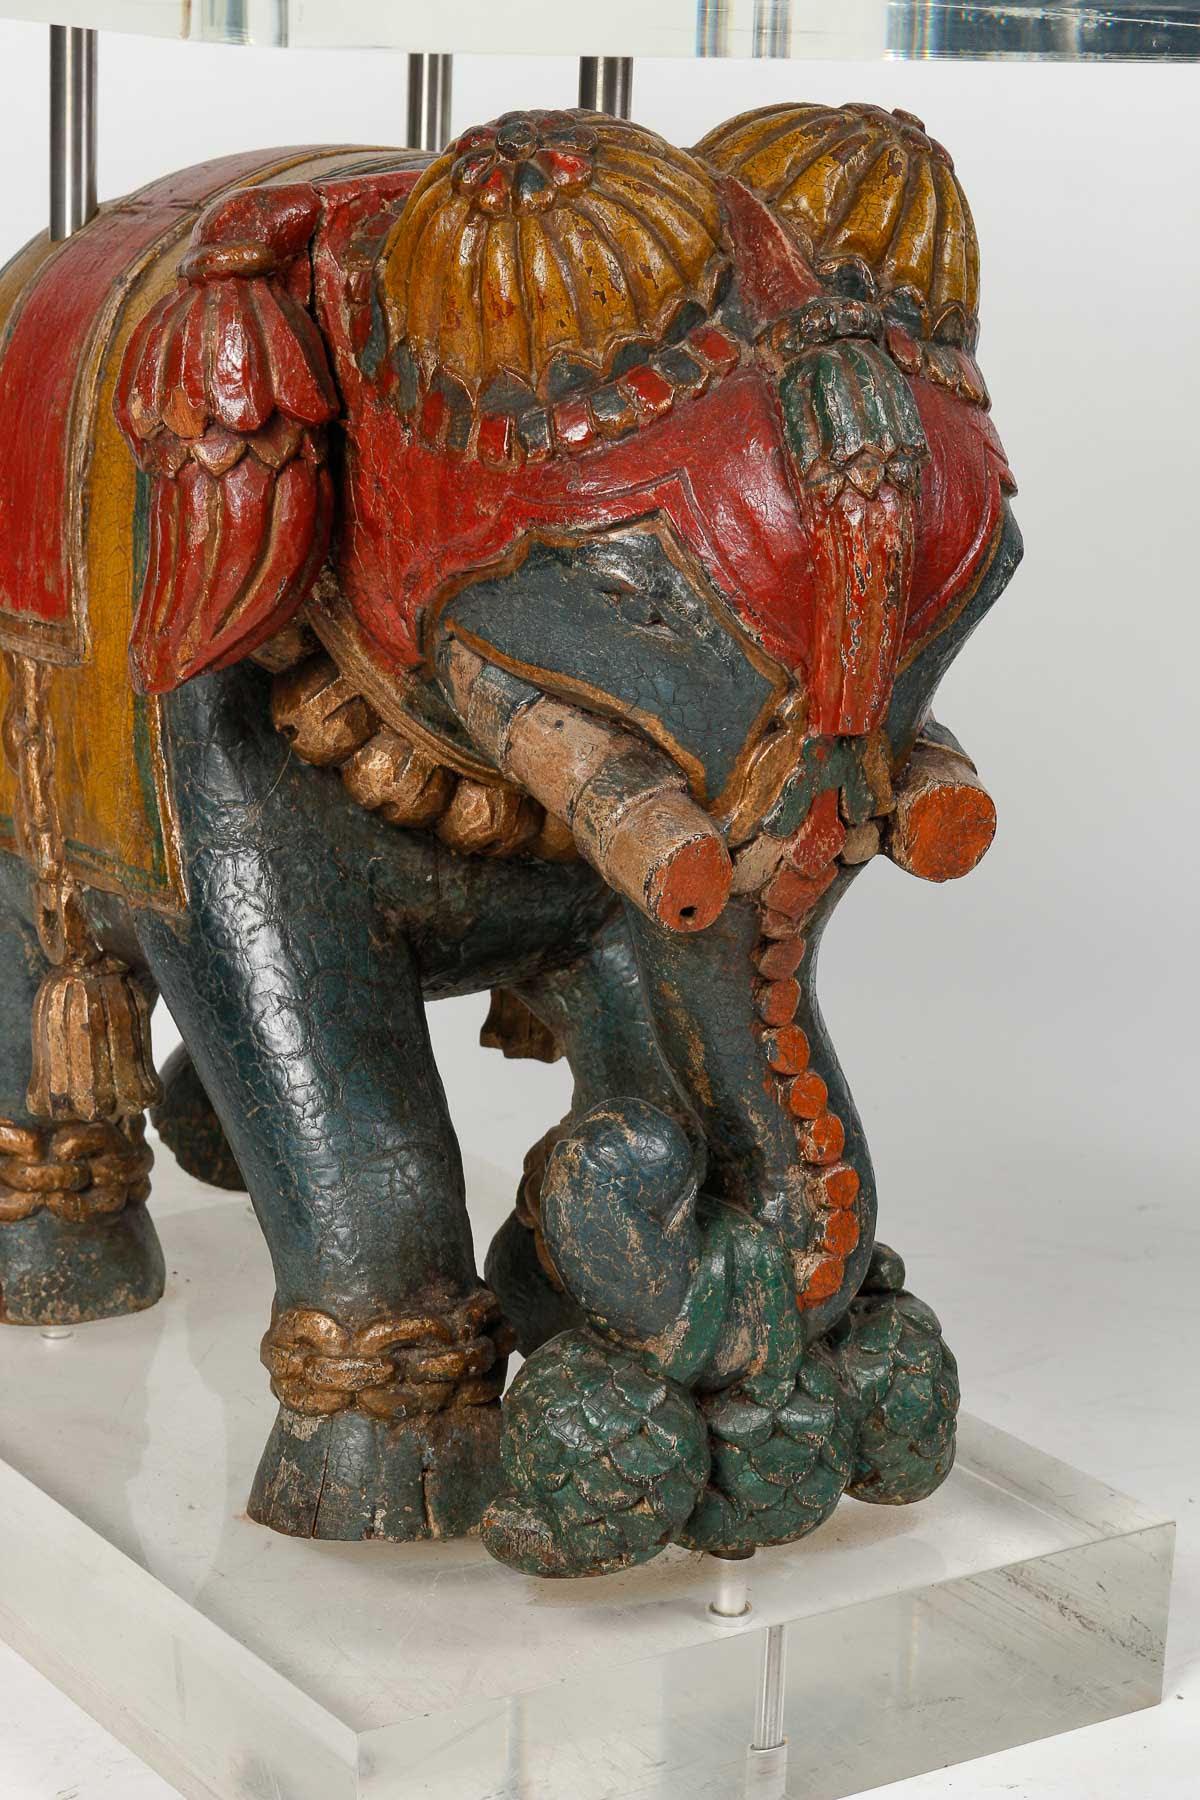 Pair of sofa ends, Elephant side table.

Pair of sofa ends, side table with elephants, elephants in painted wood with a base and a plexiglass top, slight scratches from use on the plexiglass, very good quality and workmanship.  

H: 55cm, W: 61cm,